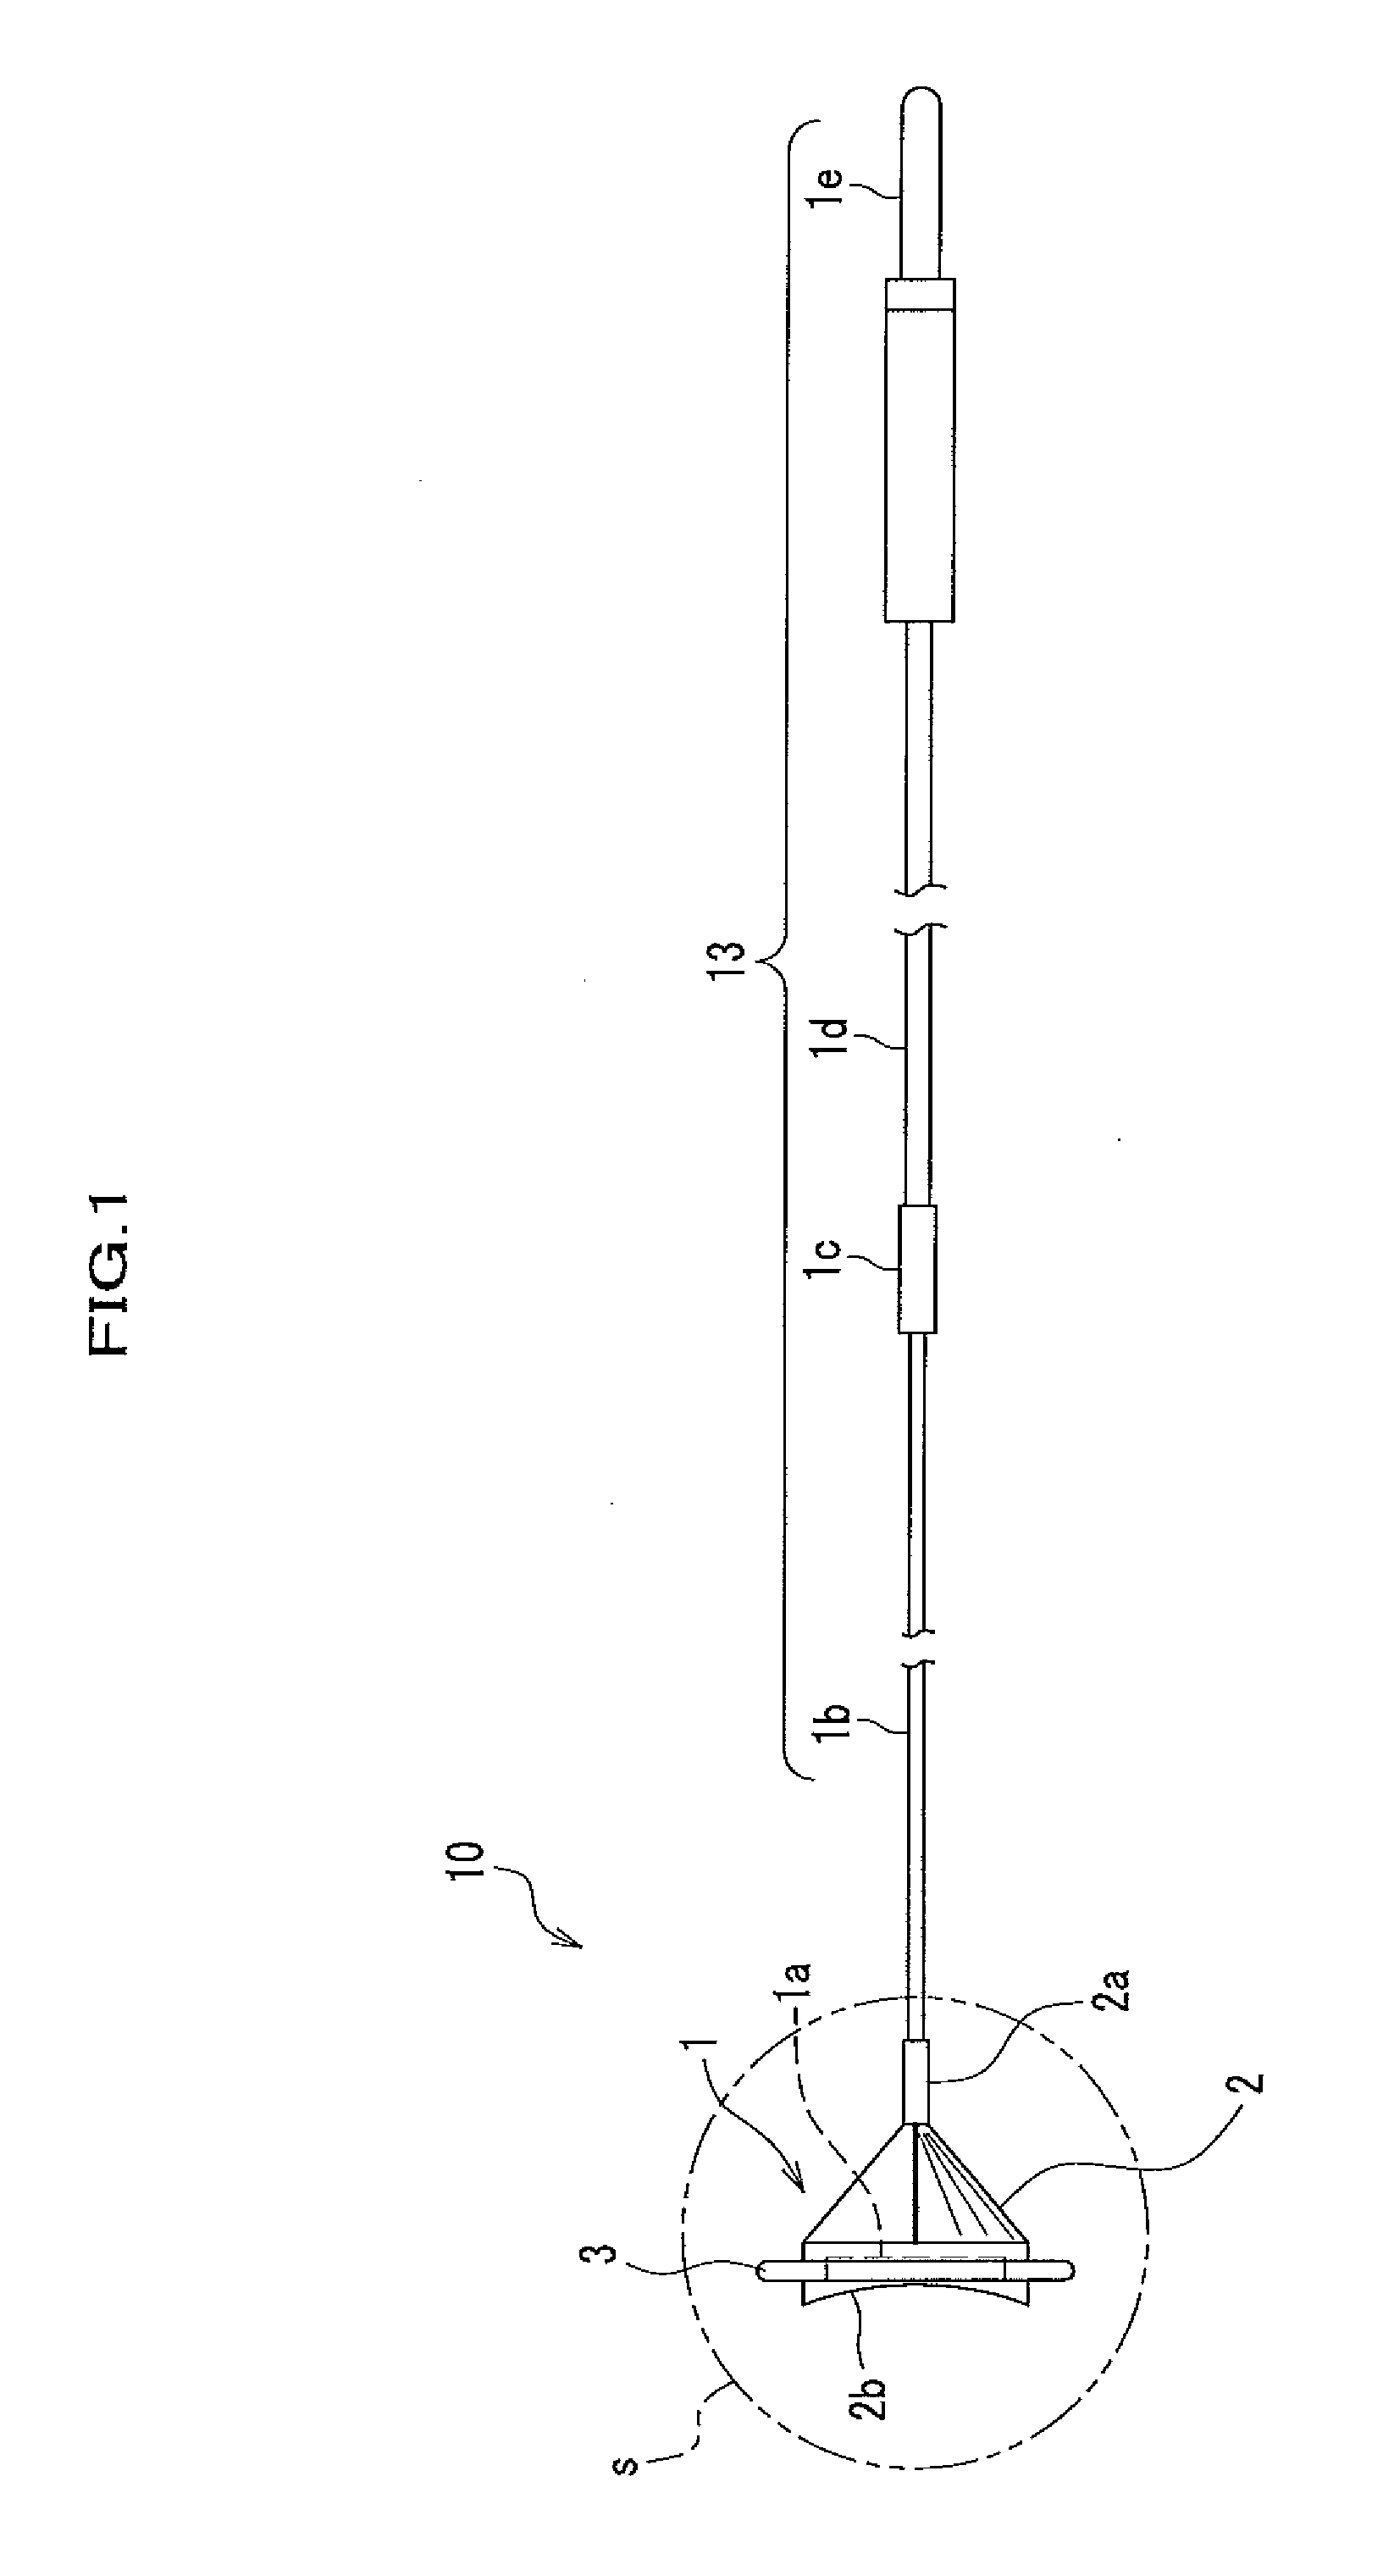 Electrode for continuously stimulating facial nerve root and apparatus for monitoring electromyograms of facial muscles using the electrode thereof